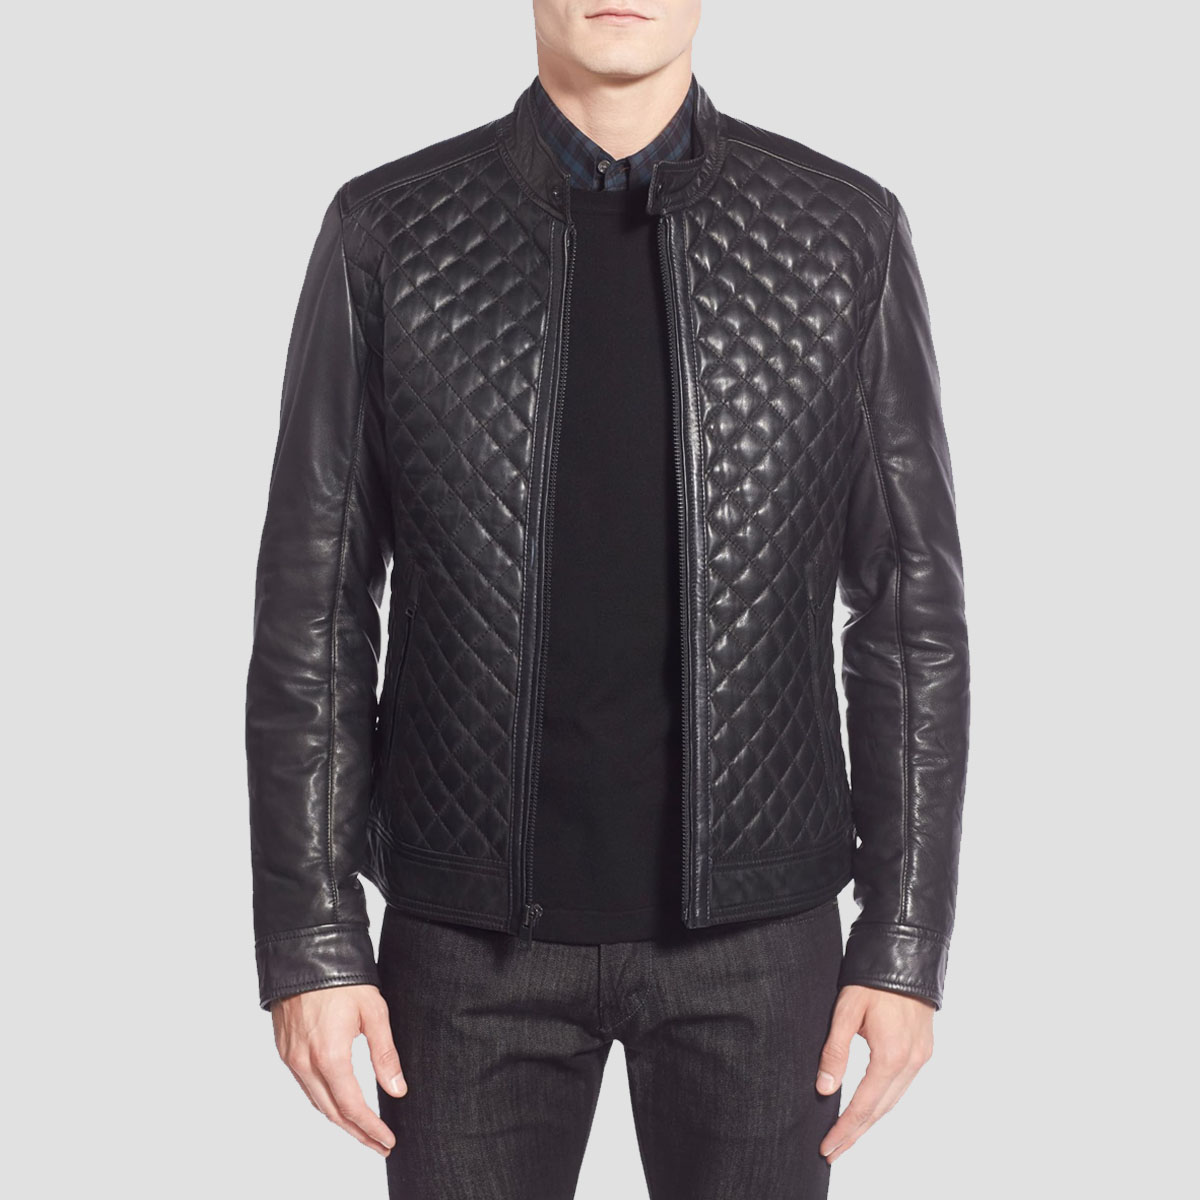 Quilted Black and Blue Leather Biker Jacket - The Vintage Leather